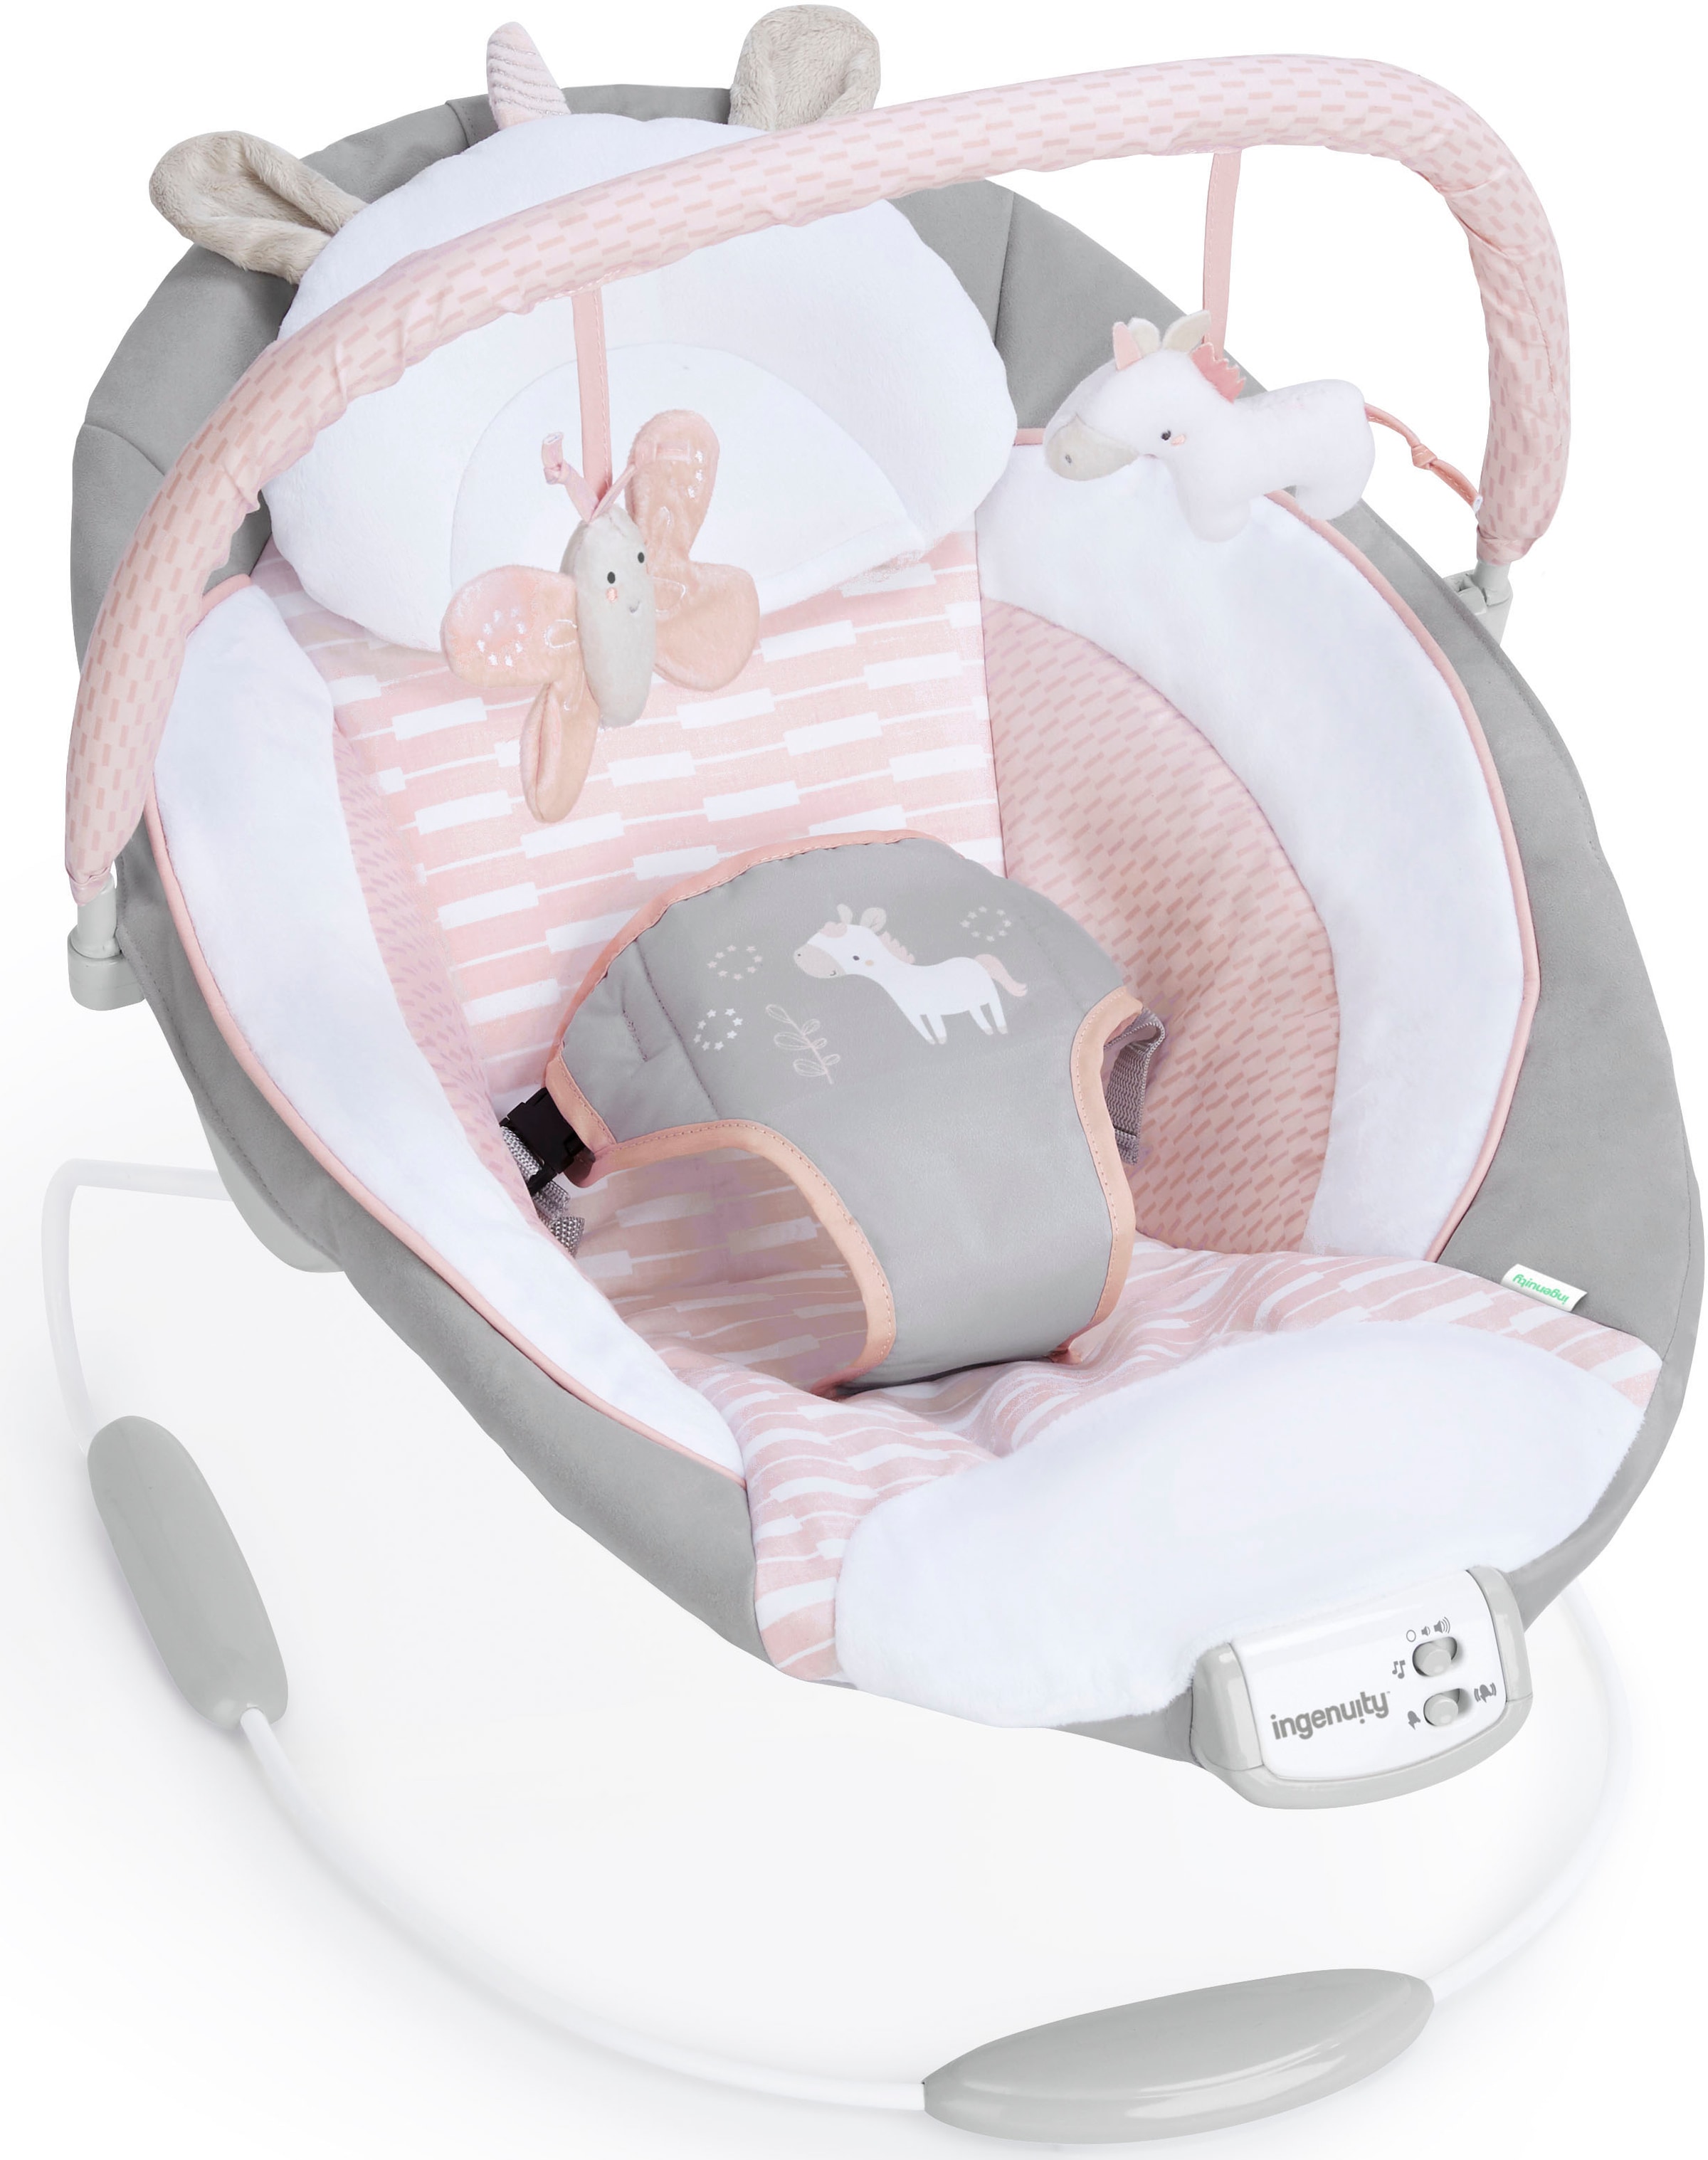 ingenuity Babywippe »Soothing Bouncer, Flora the Unicorn«, bis 9 kg, mit Vibration und Melodien